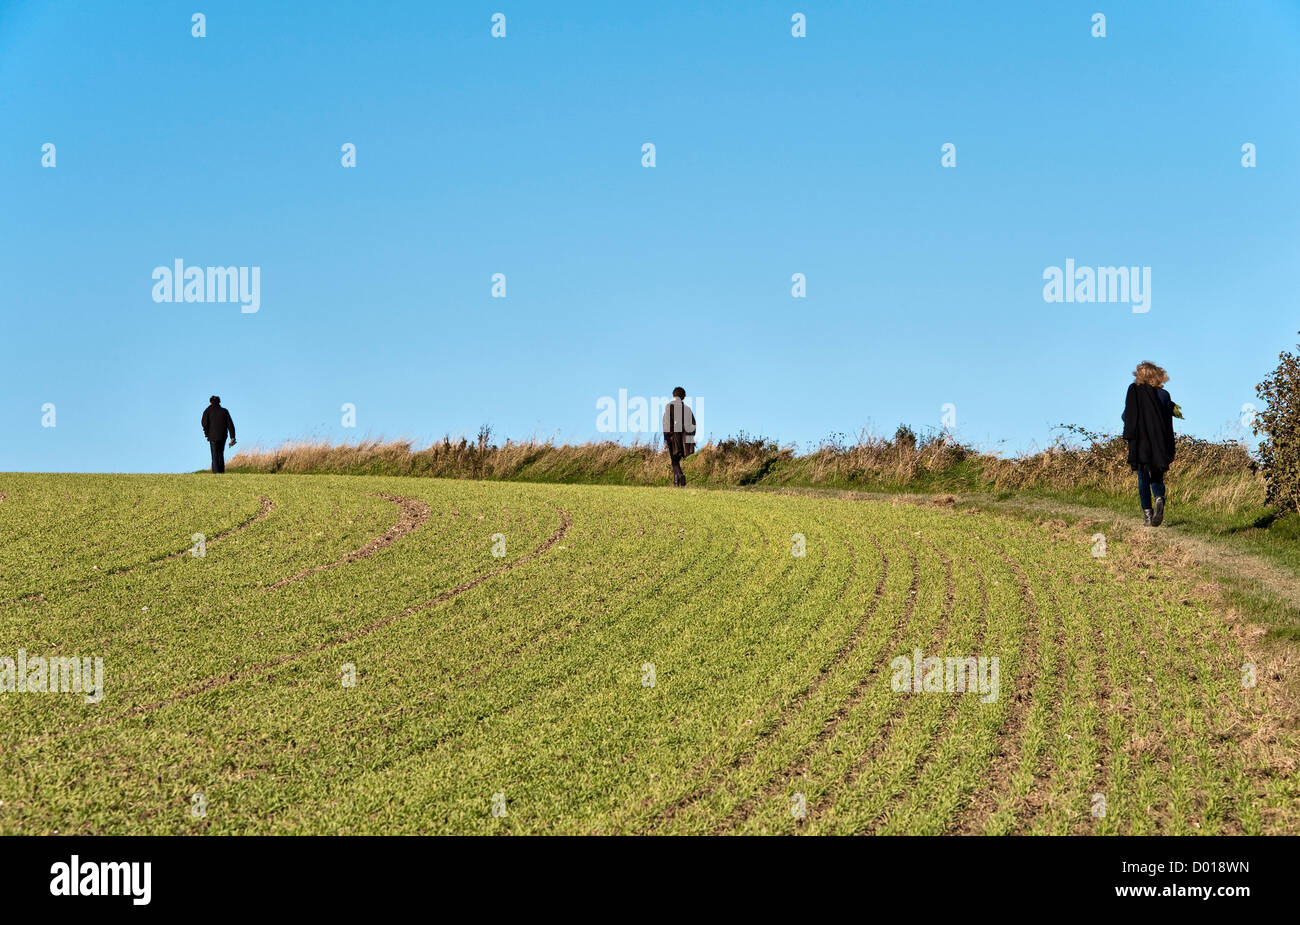 Three people on a socially distanced walk in the Kent countryside, UK Stock Photo